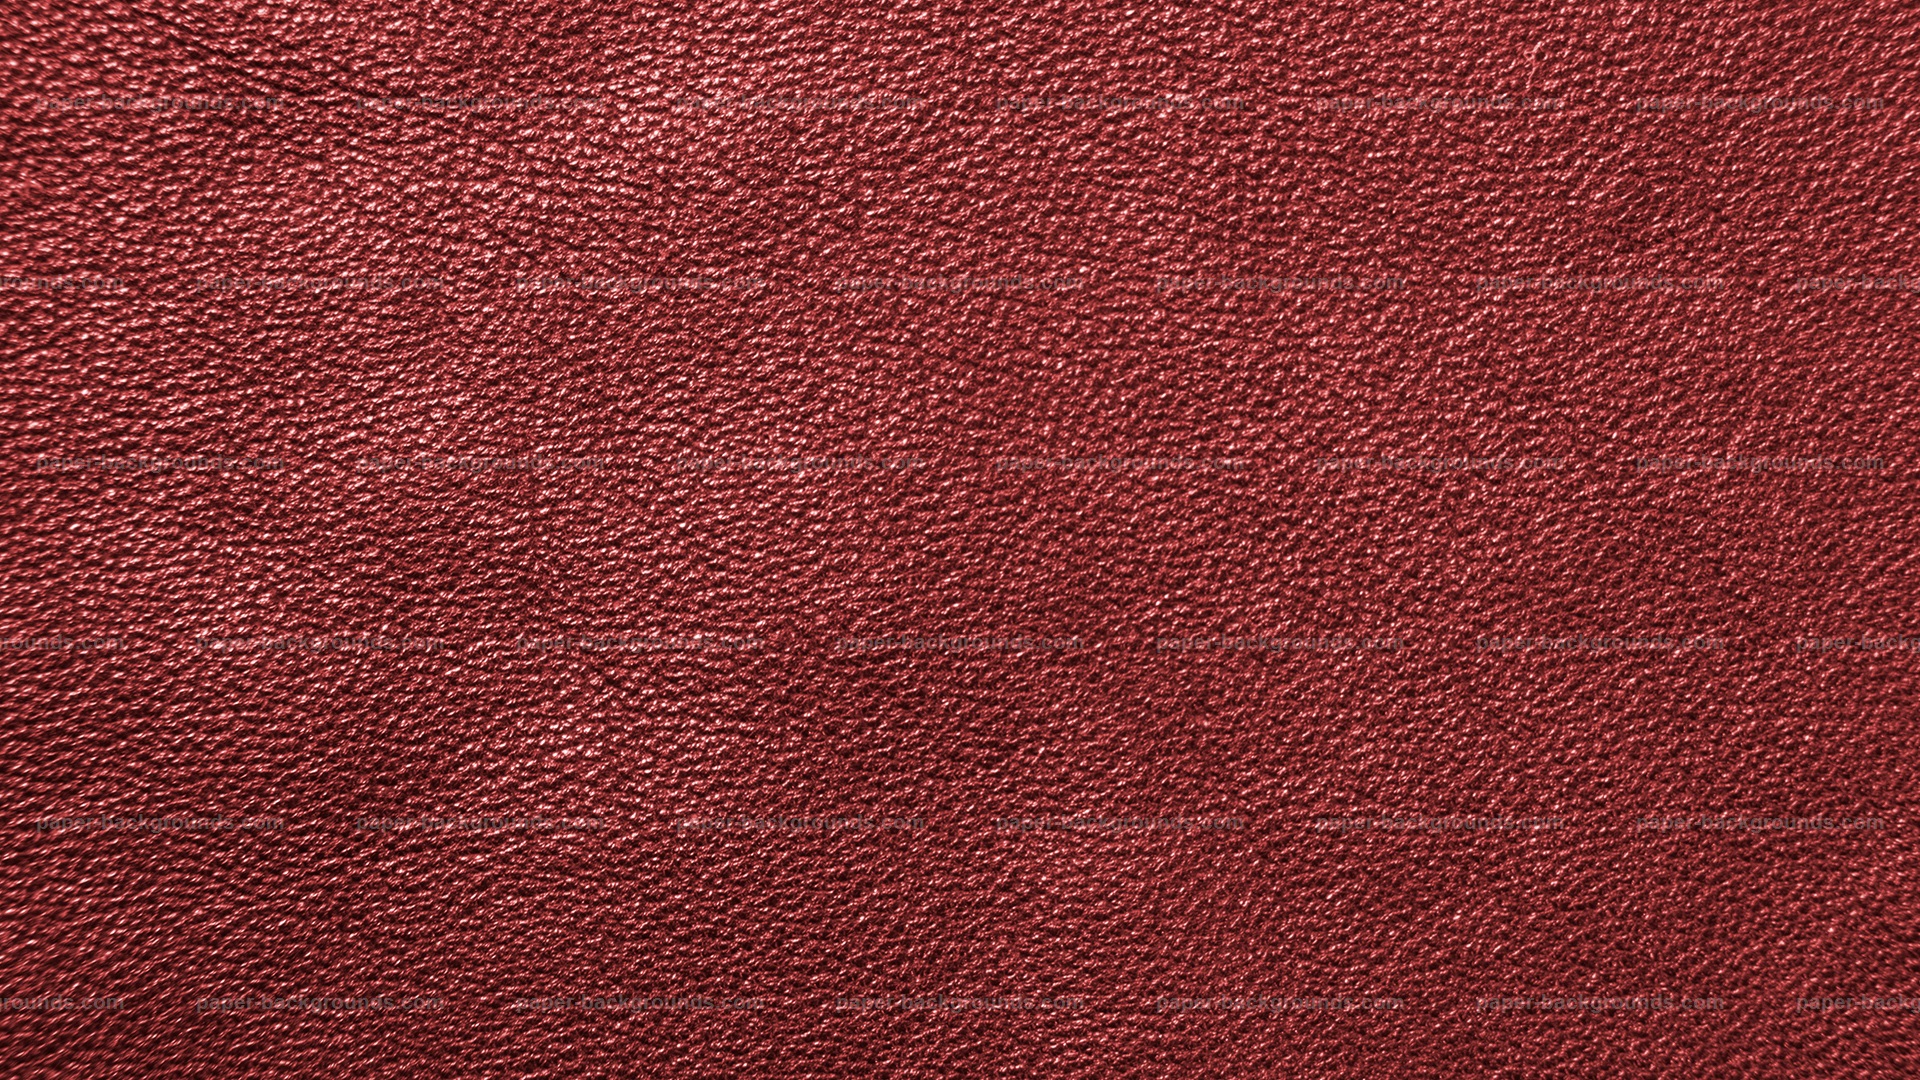 Red Leather Macro Texture HD Paper Backgrounds